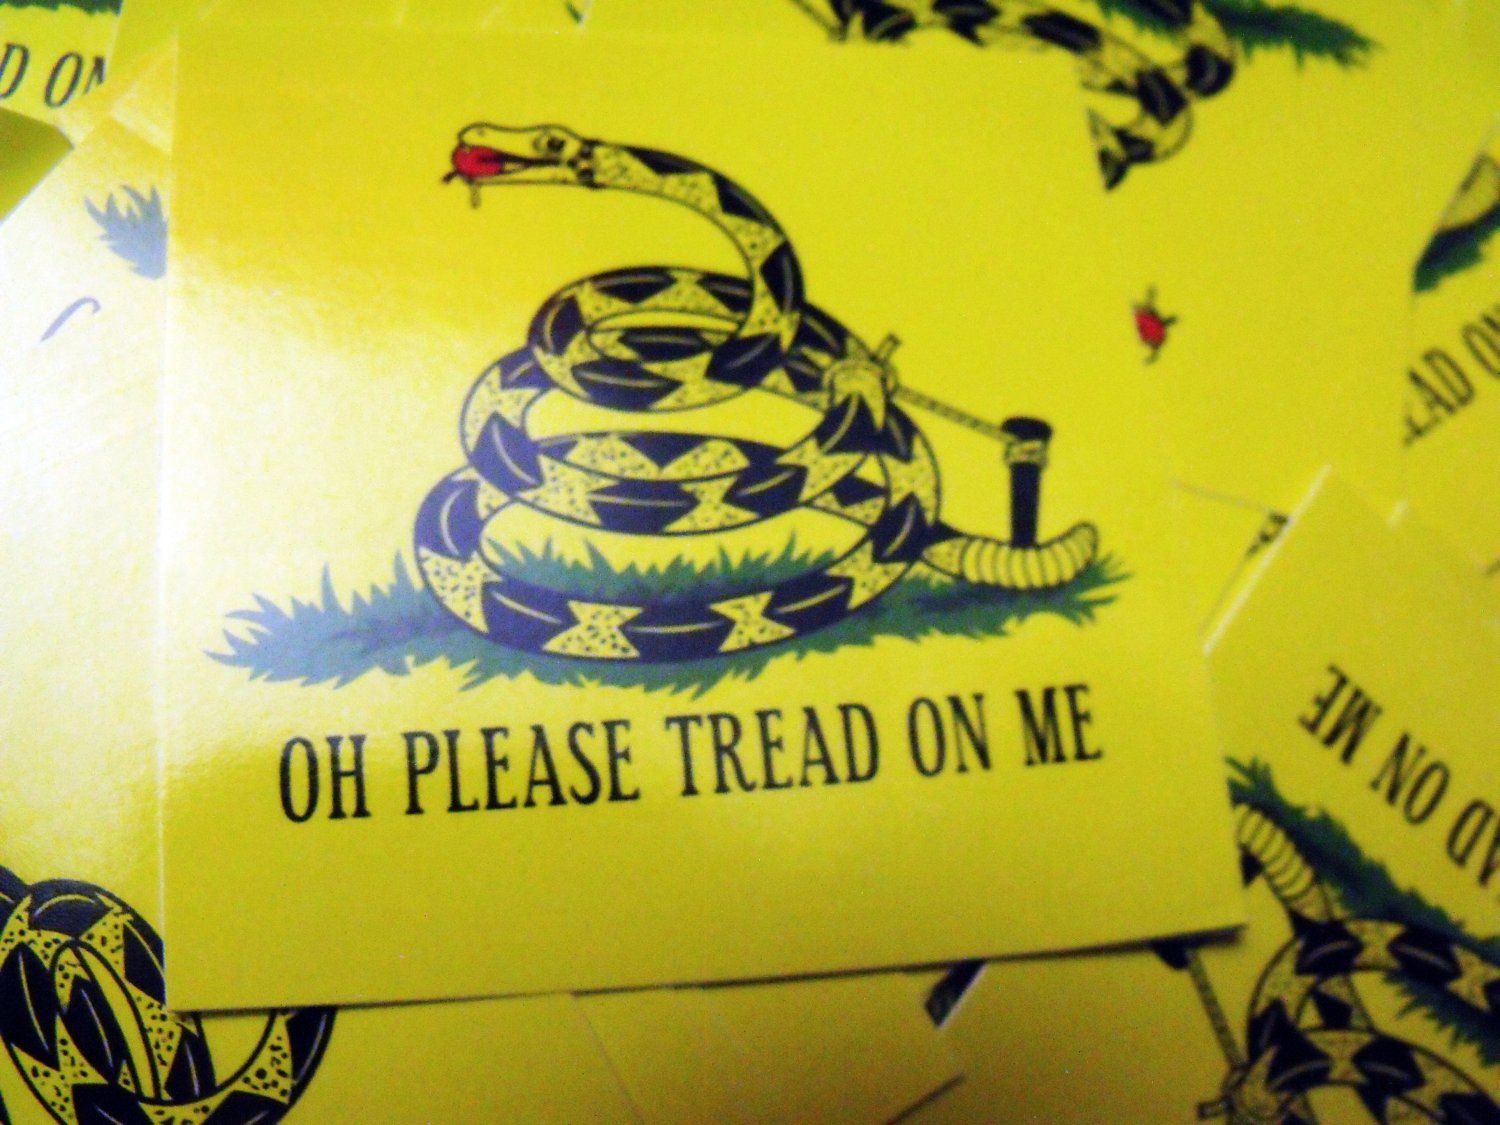 25 OH PLeASE TReAD ON ME 2.5" x 2.5" stickers